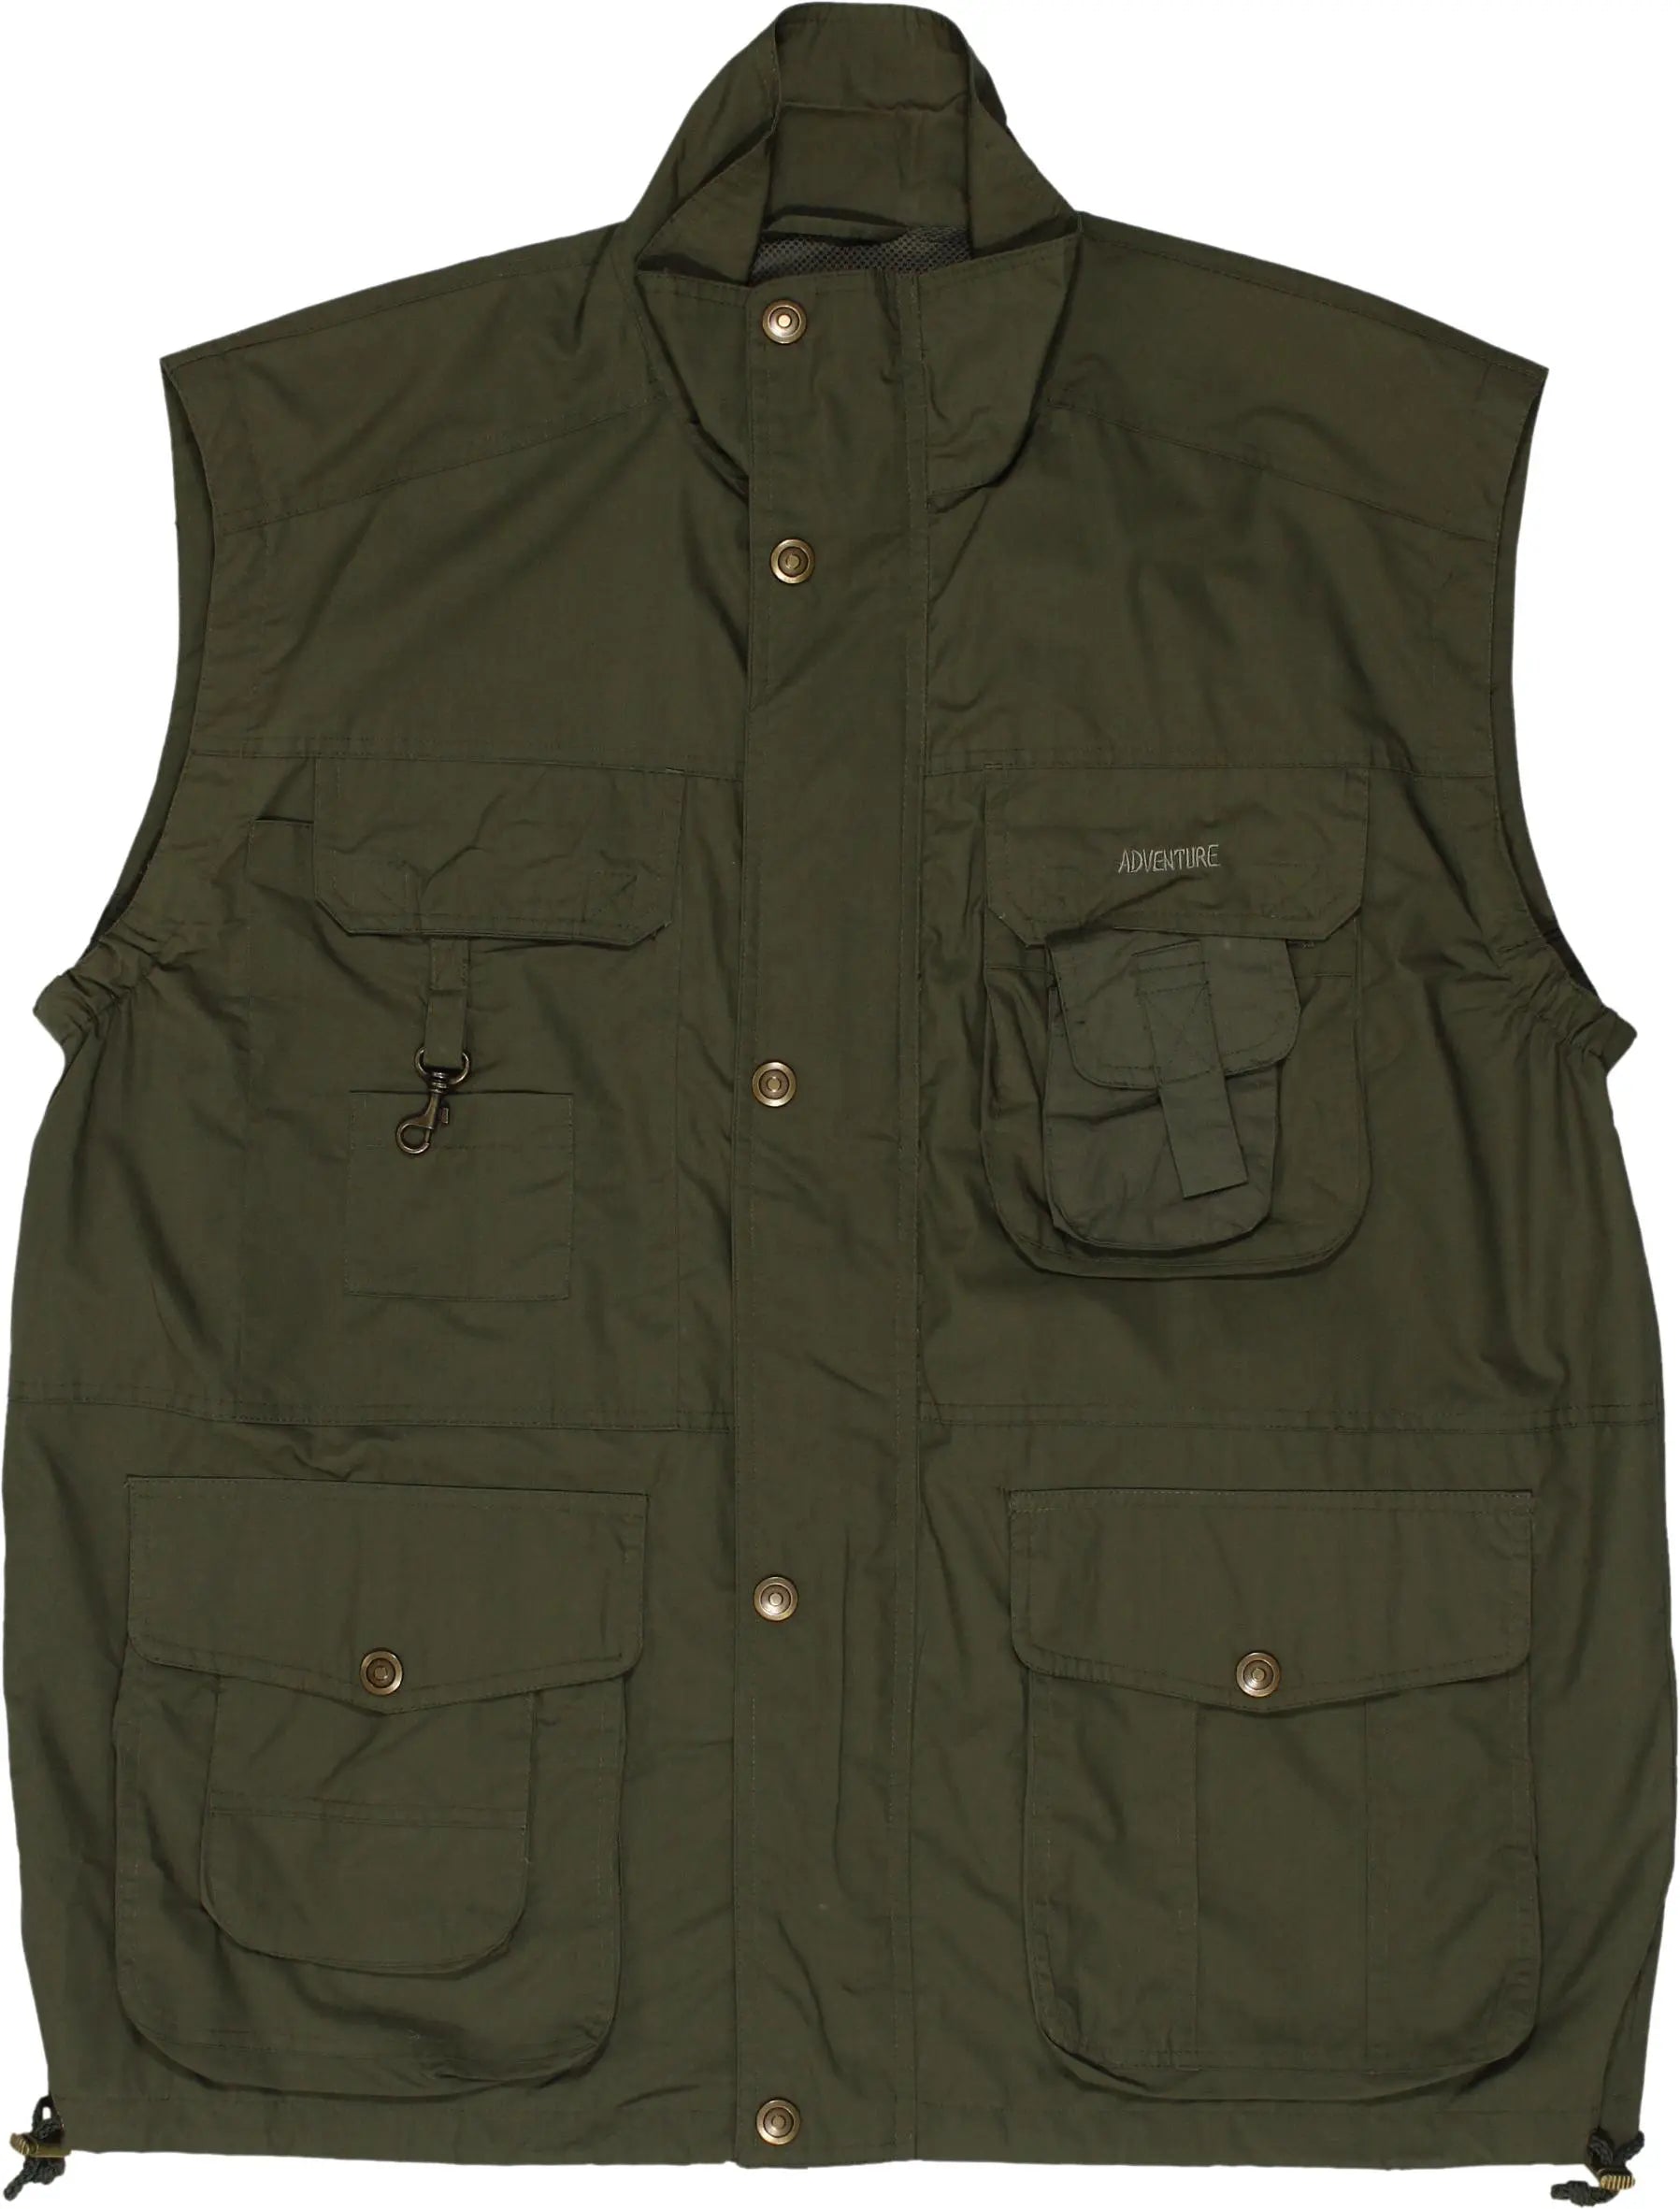 Unknown - Outdoor vest- ThriftTale.com - Vintage and second handclothing